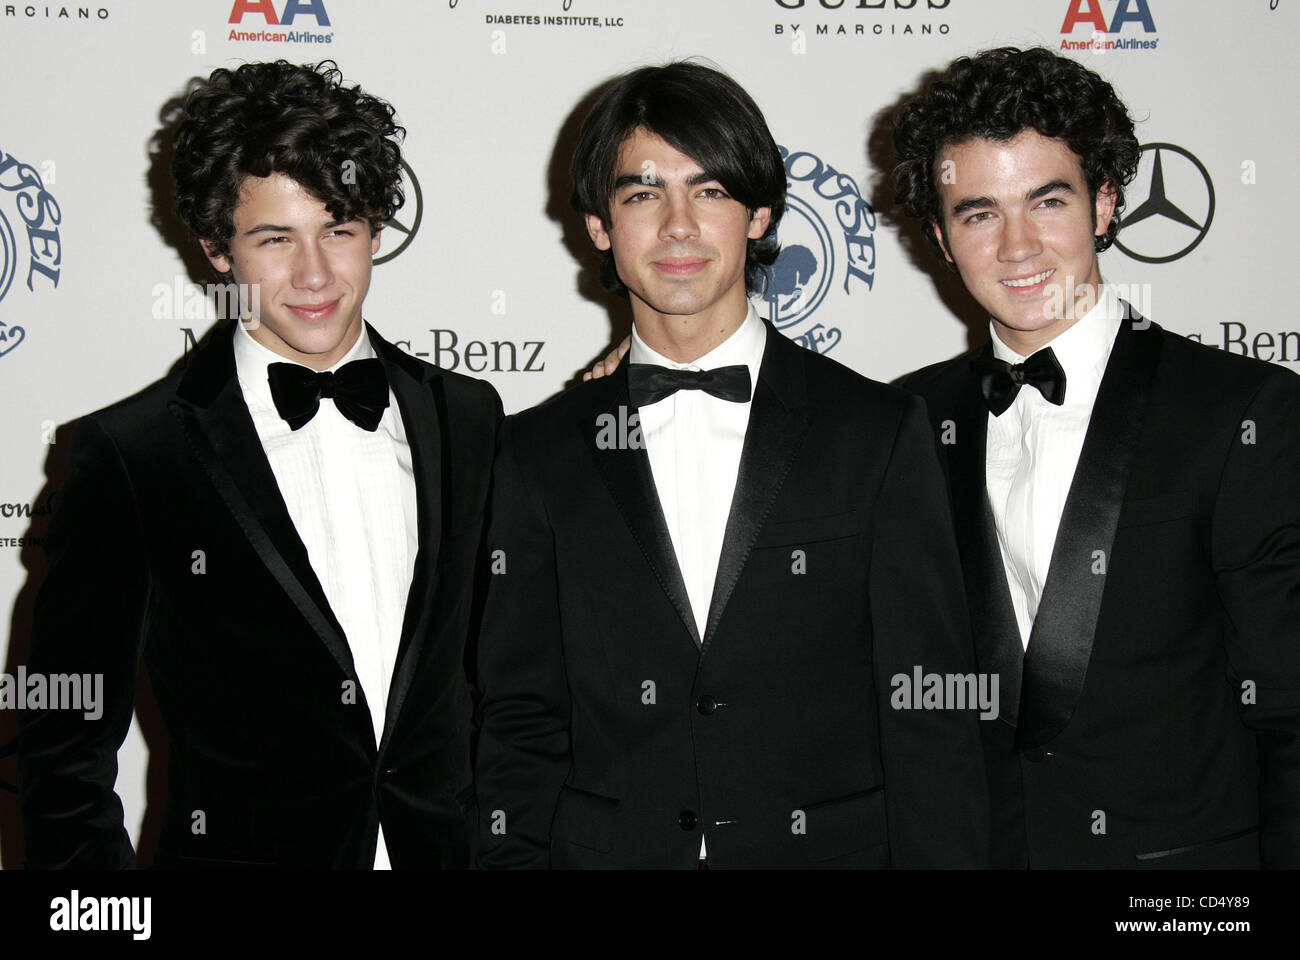 Oct 25, 2008 - Beverly Hills, California, USA - Boy band JONAS BROTHERS during arrivals at the The 30th Anniversary Carousel Of Hope Ball at the Beverly Hilton Hotel. (Credit Image: © Lisa O'Connor/ZUMA Press) Stock Photo